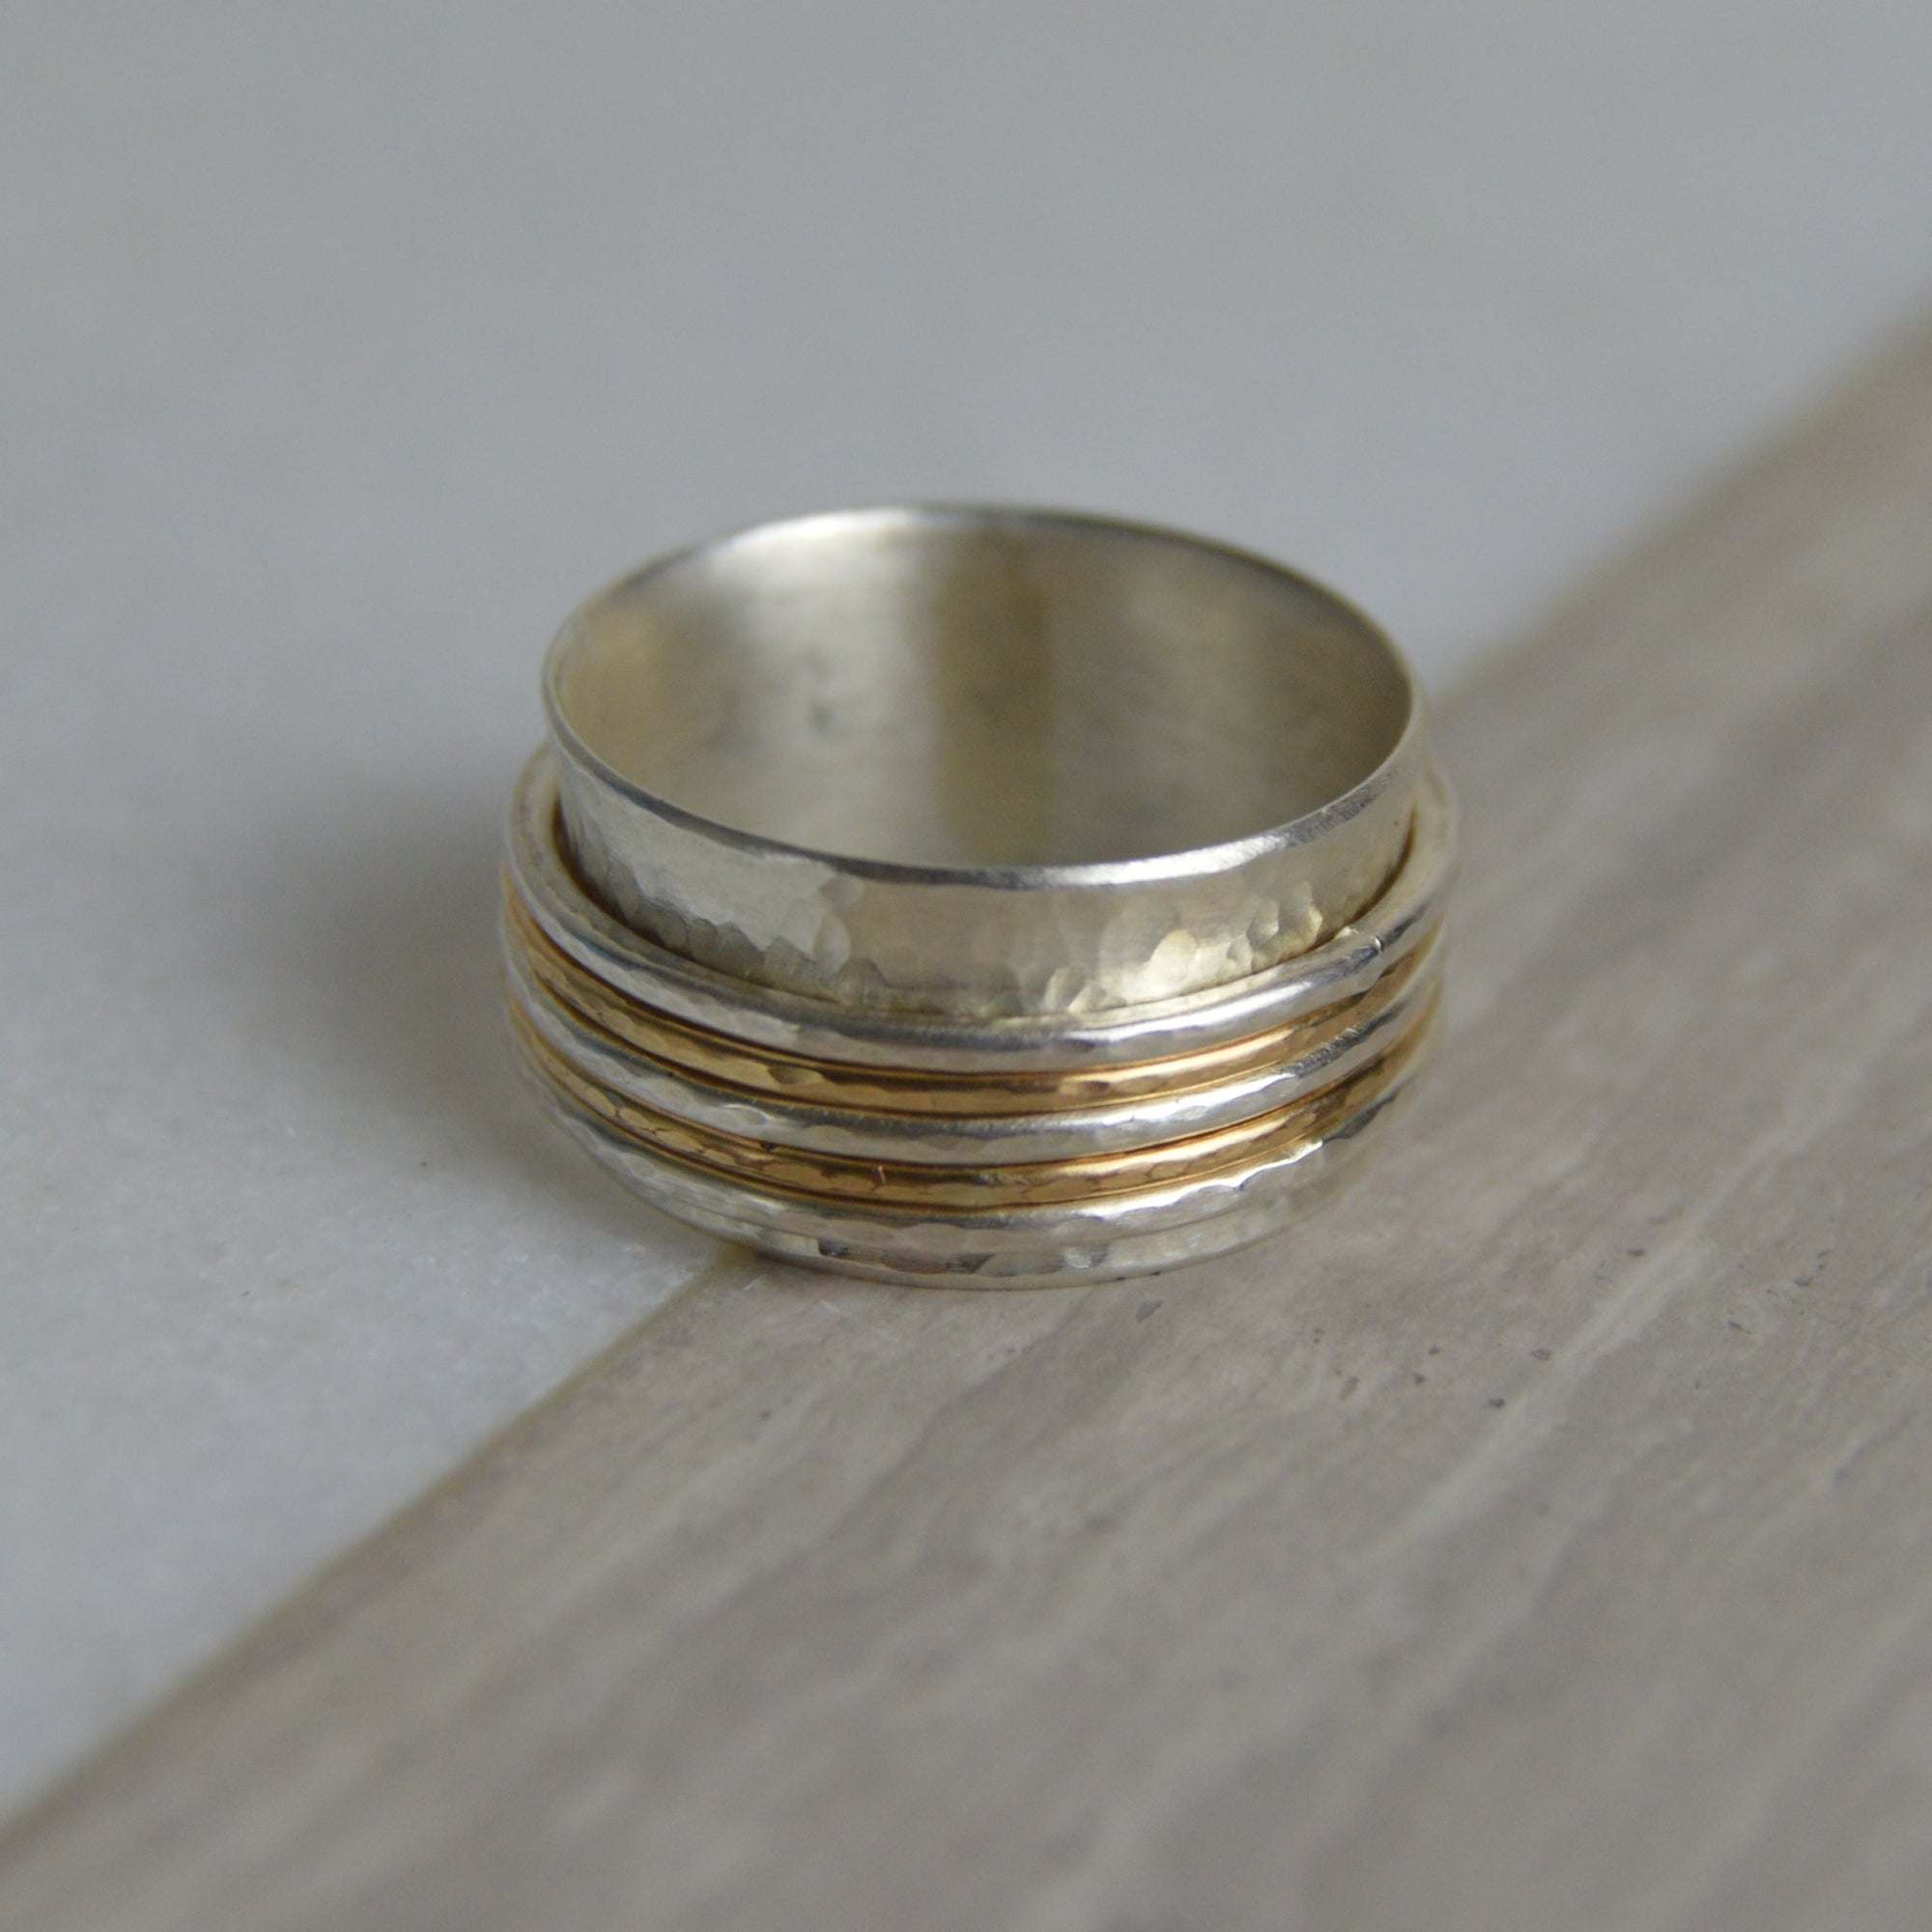 Silver & Gold Fill Spinning Ring - Made to Order - The Nancy Smillie Shop - Art, Jewellery & Designer Gifts Glasgow